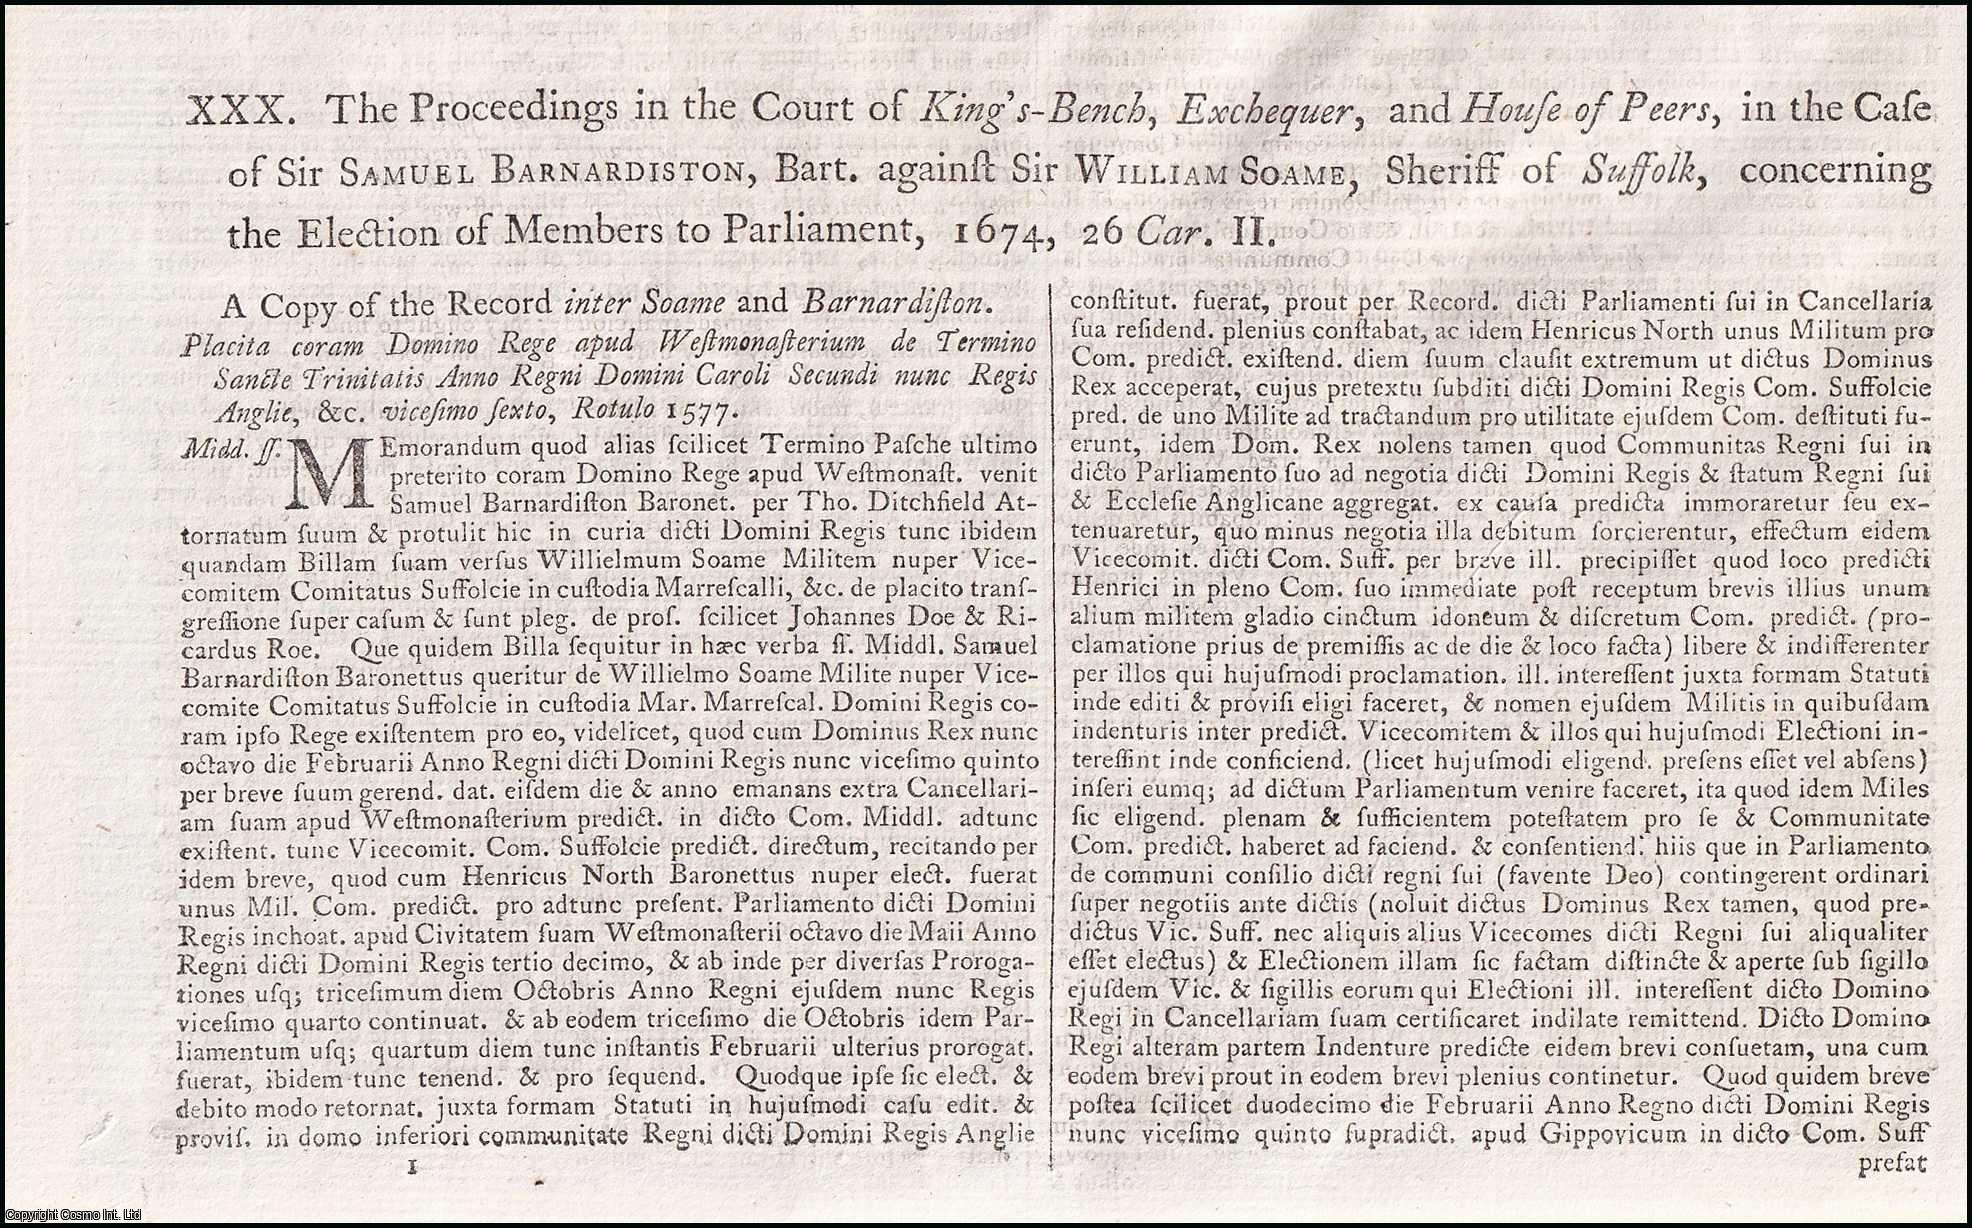 [Trial]. - The Proceedings in the Court of King's-Bench, Exchequer, and House of Peers, in the Case of Sir Samuel Barnardiston, Bart. Against Sir William Soame, Sheriff of Suffolk, concerning the Election of Members to Parliament, 1674. An original report from the Collected State Trials.